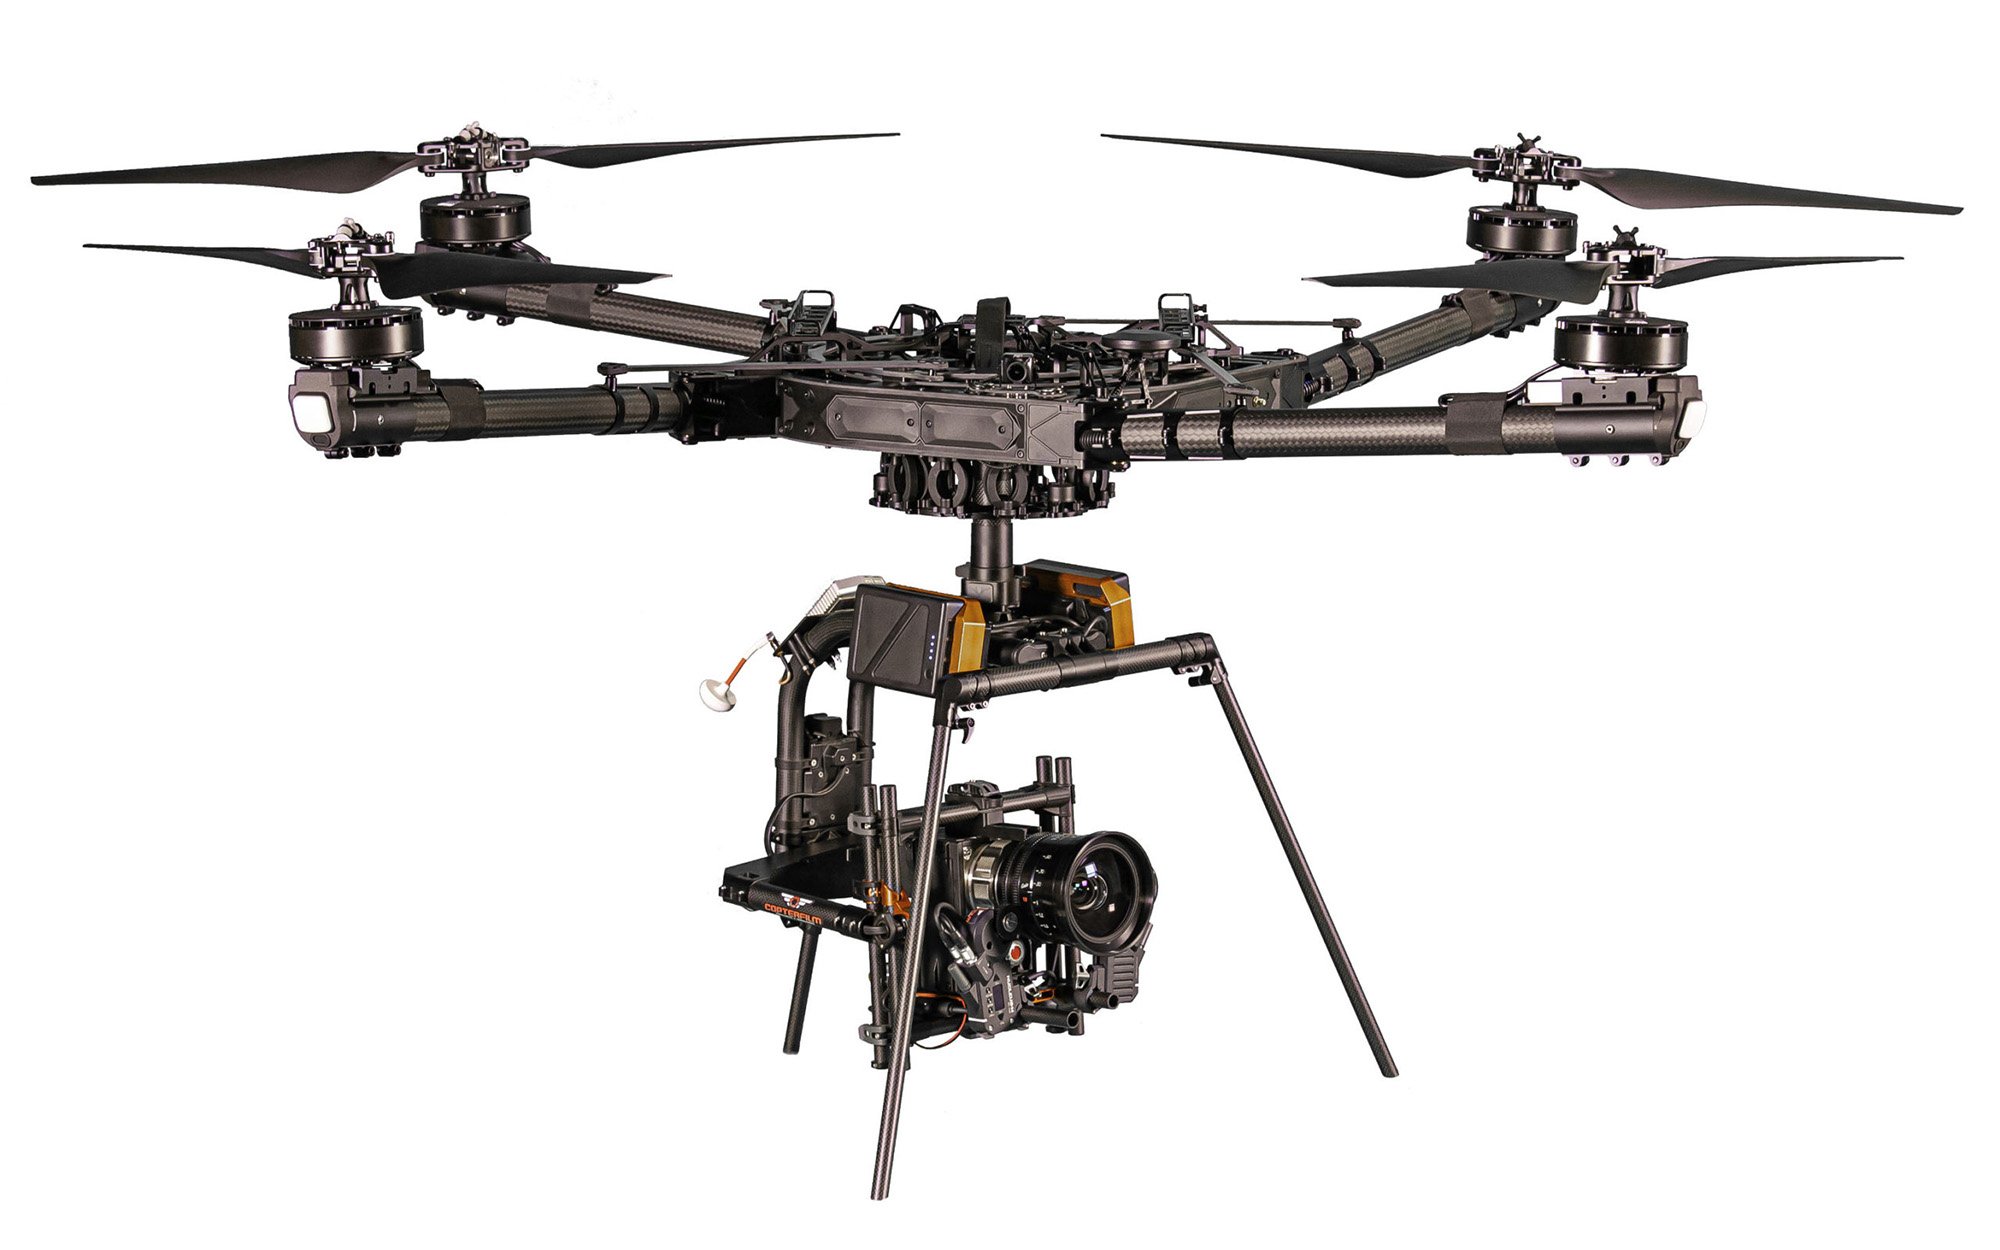 Image of the Alta X drone equipped with Movi Pro stabilizer. Renowned for its ability to lift custom camera configurations, it's a top choice for filmmakers seeking a distinct cinematic look and feel.